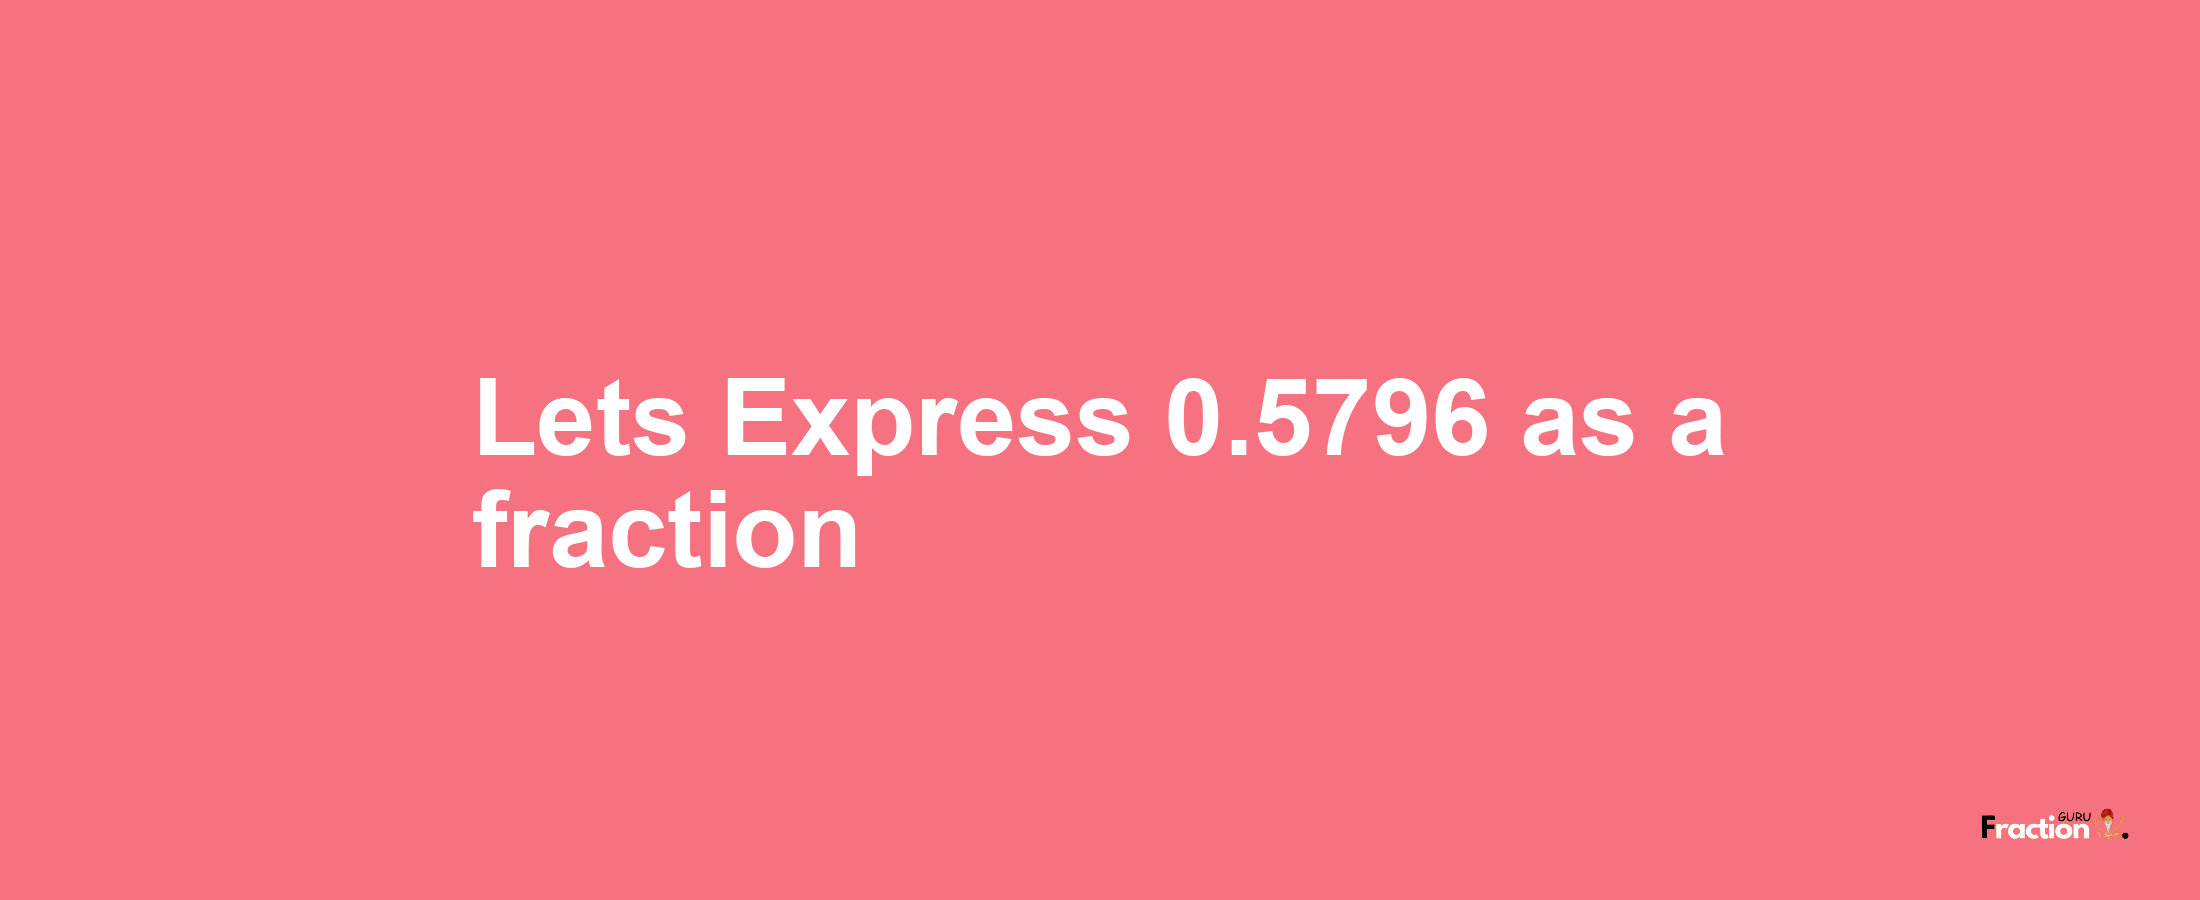 Lets Express 0.5796 as afraction